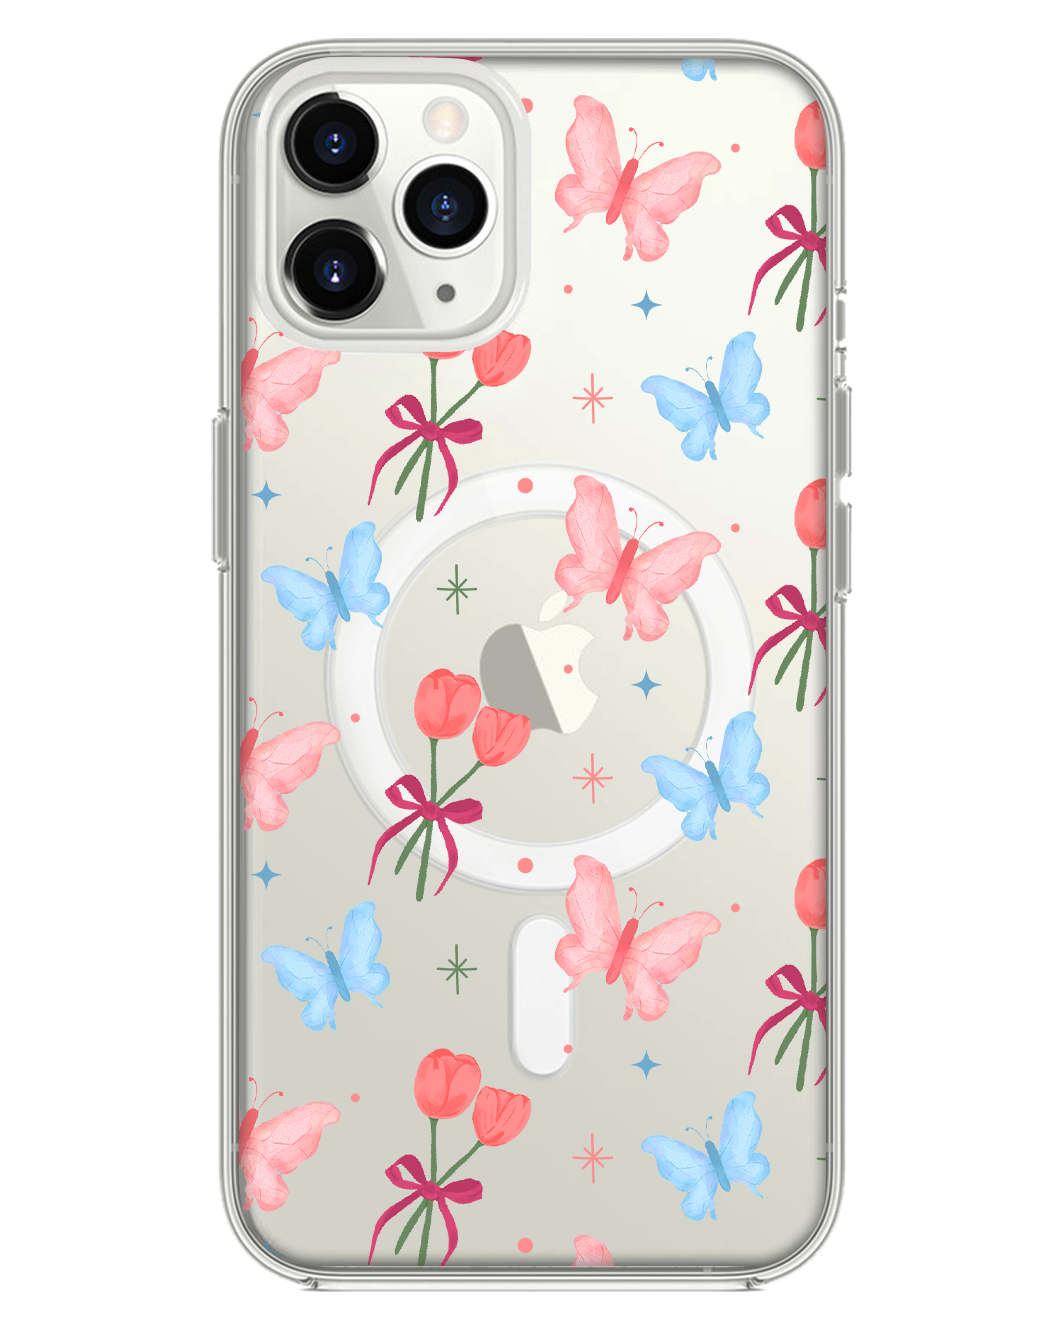 iPhone Rearguard Hybrid - Coquette Butterfly